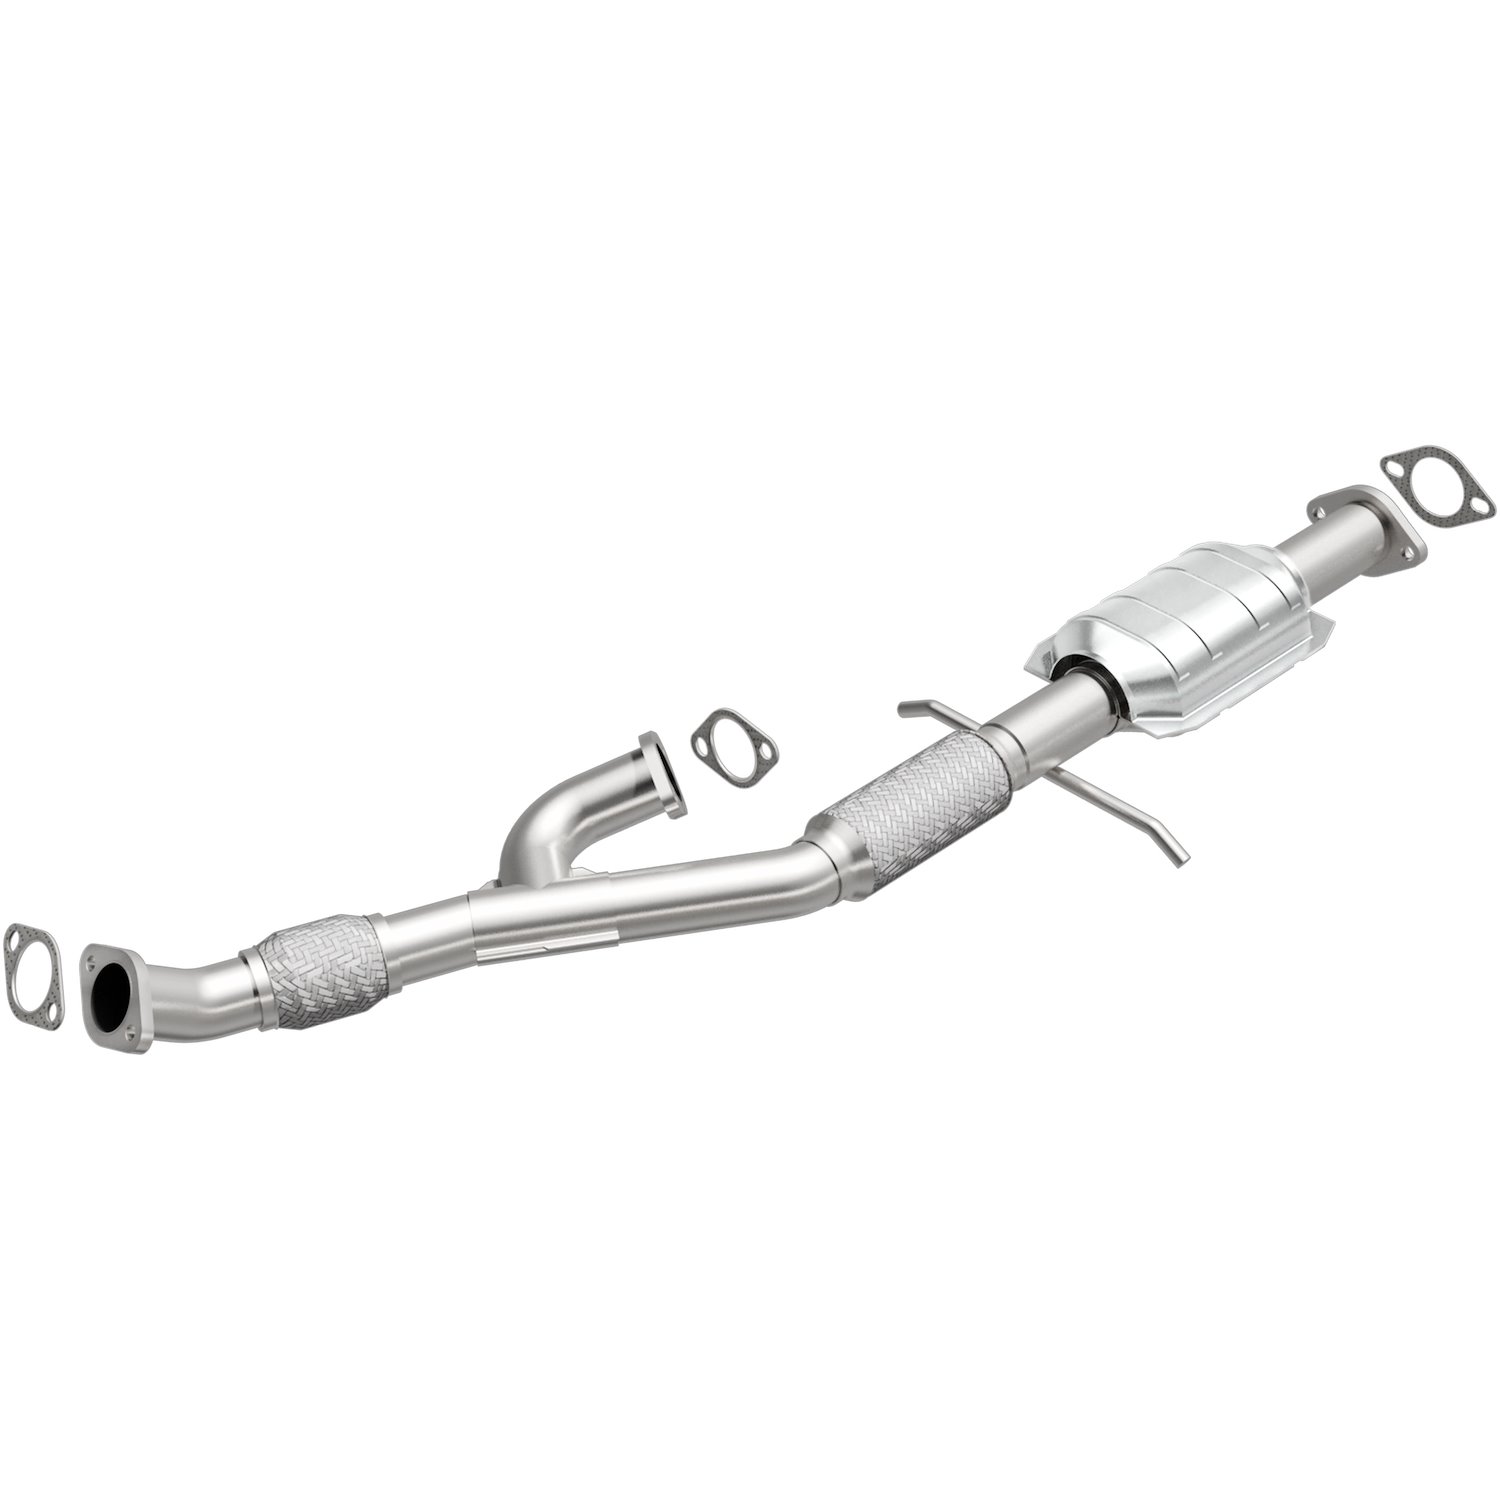 HM Grade Federal / EPA Compliant Direct-Fit Catalytic Converter 26212